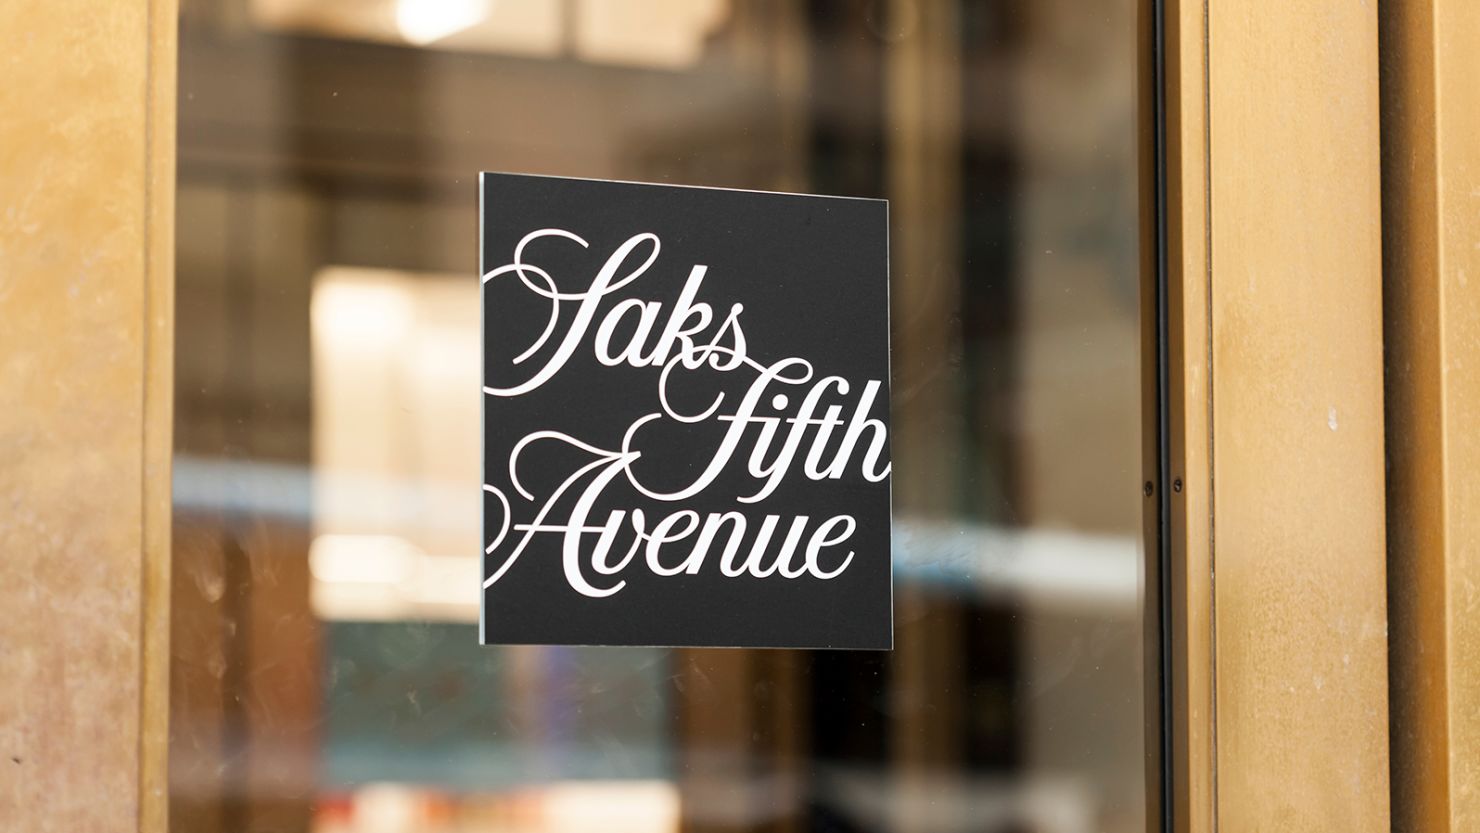 Saks Fifth Avenue says it will stop selling animal fur products.